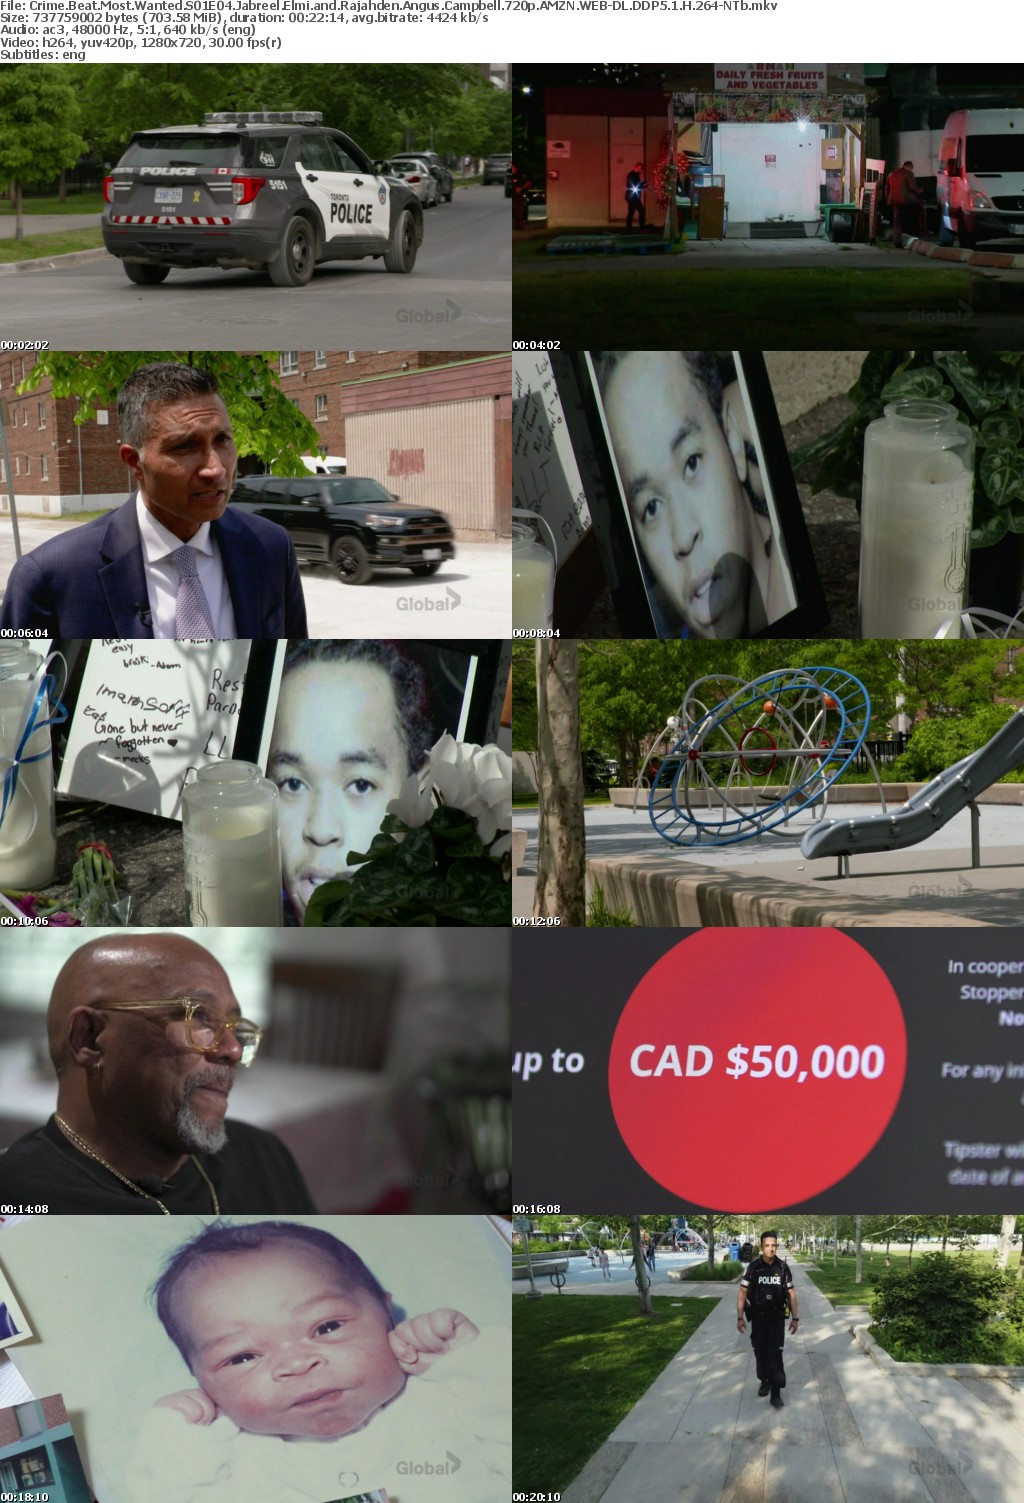 Crime Beat Most Wanted S01E04 Jabreel Elmi and Rajahden Angus Campbell 720p AMZN WEB-DL DDP5 1 H 264-NTb